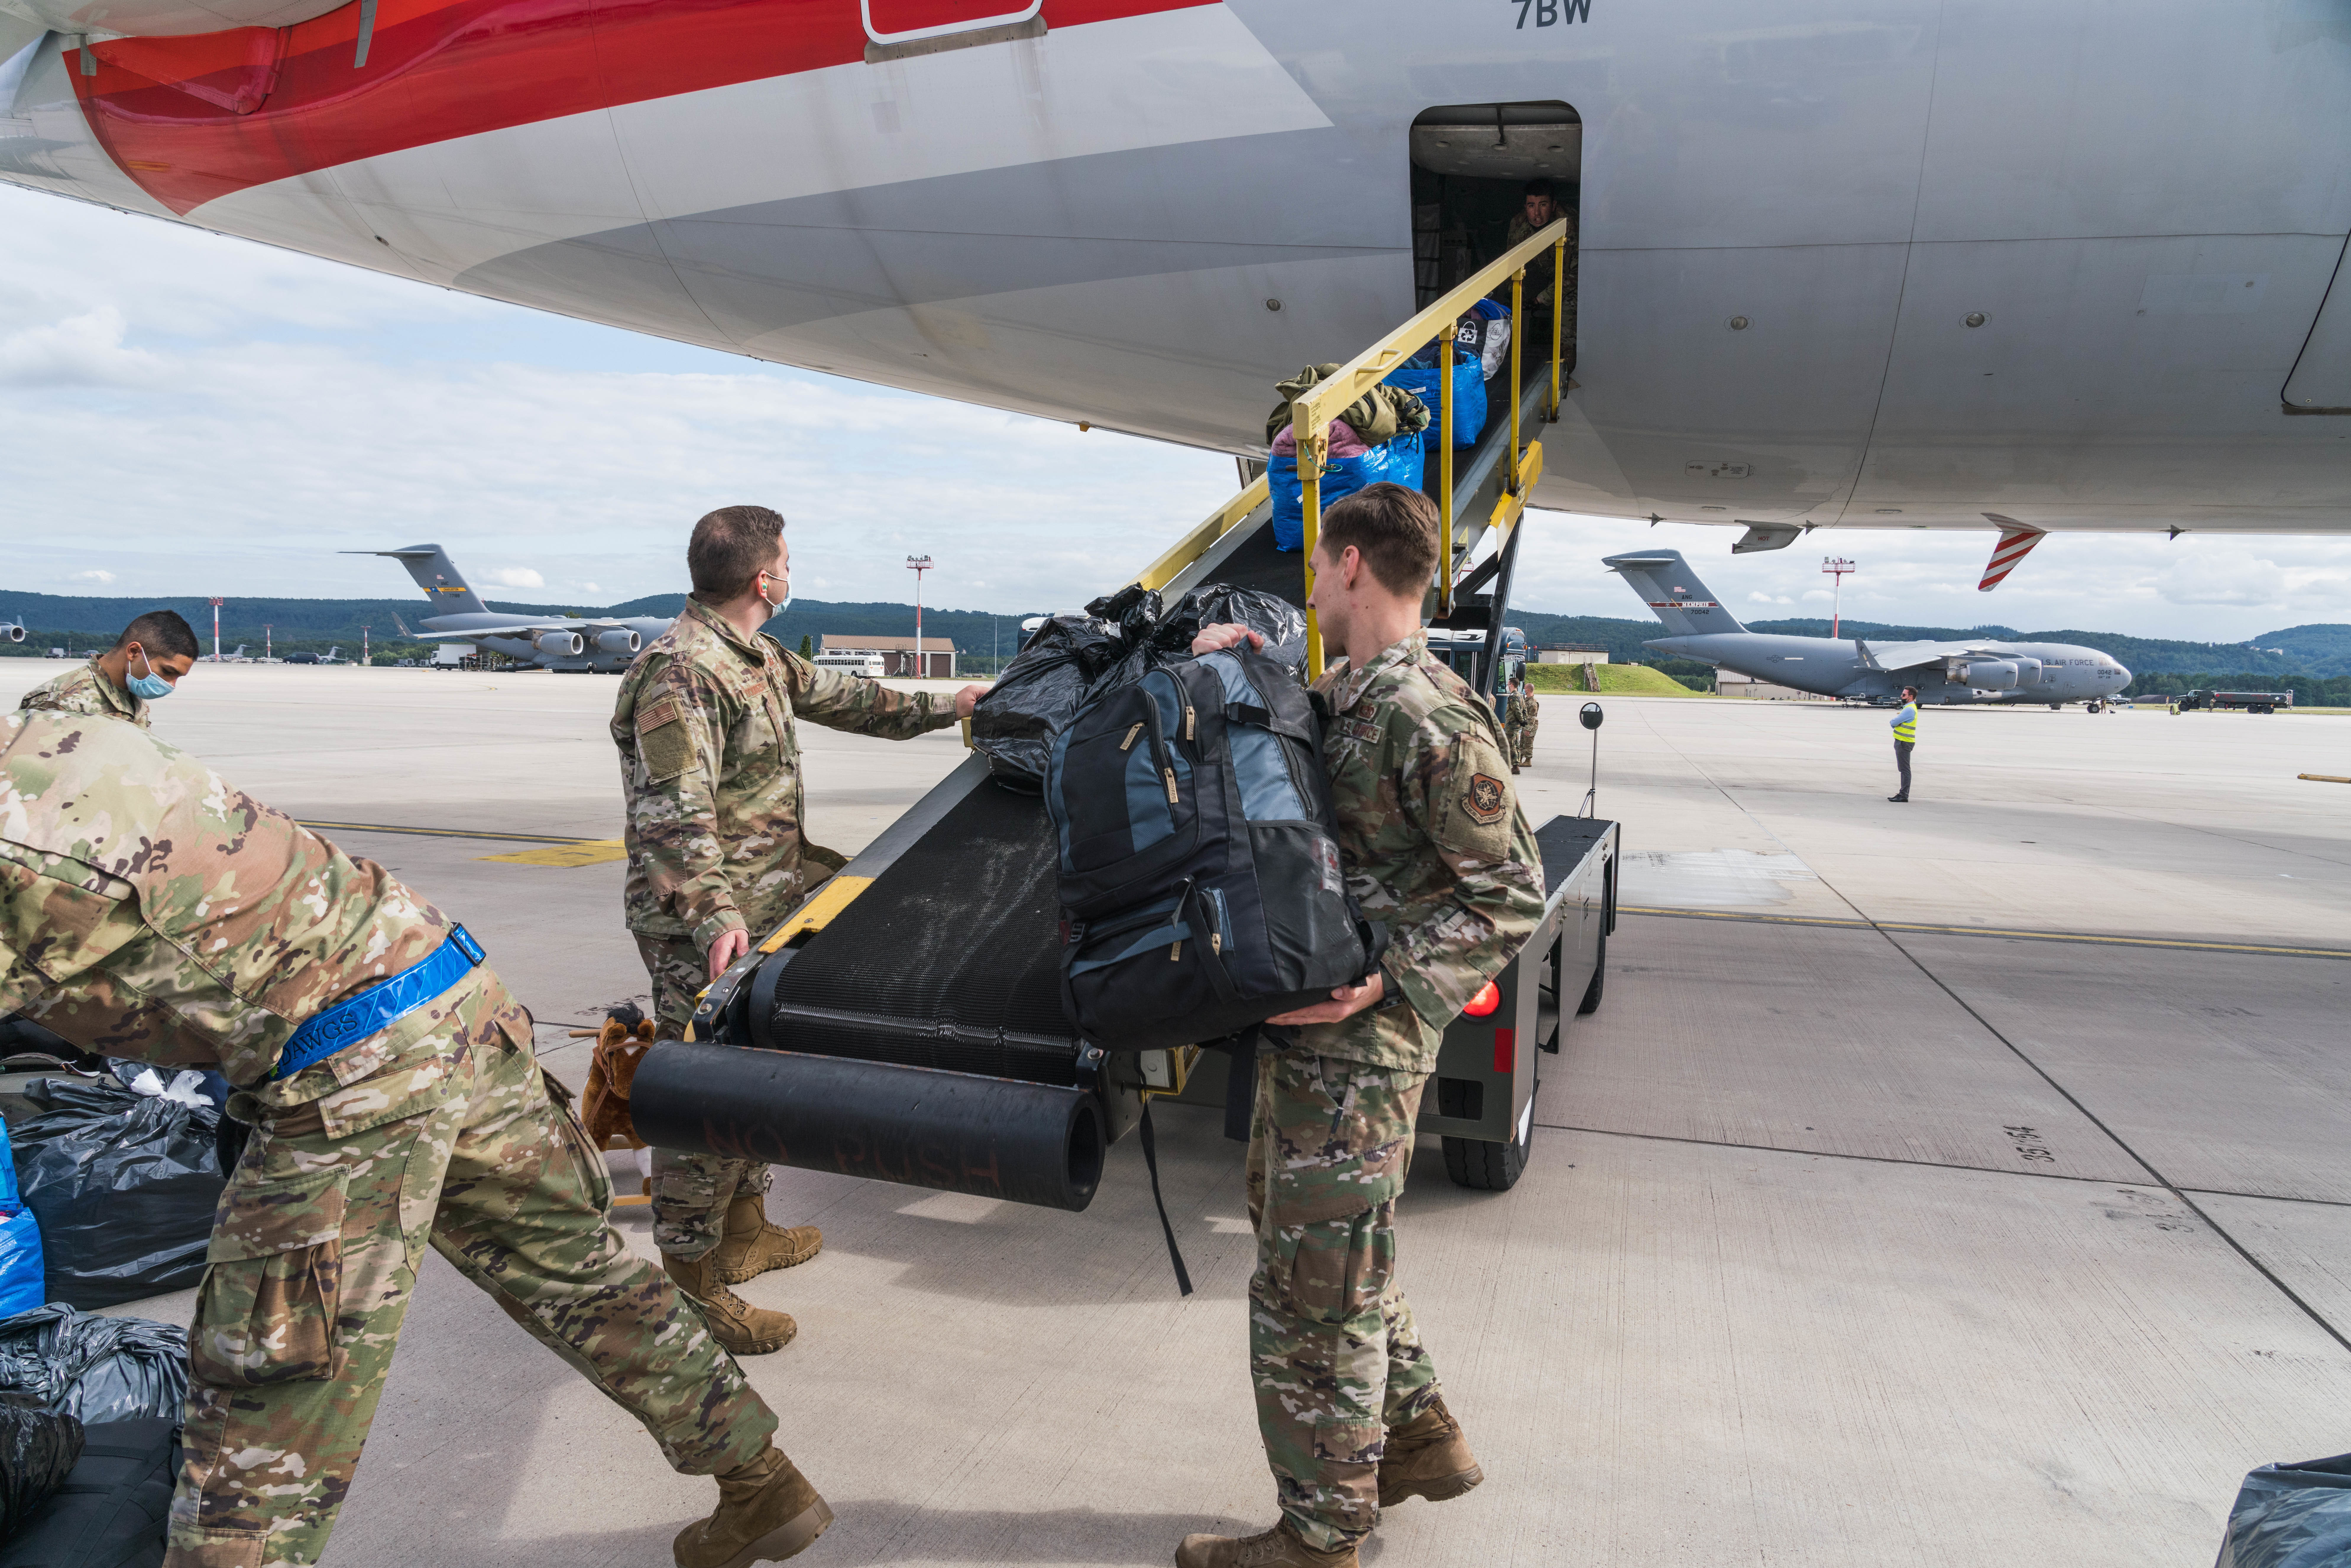 U.S. Air Force Airmen assigned to the 721st Aerial Port Squadron load luggage onto an American Airlines aircraft during Operation Allies Refuge at Ramstein Air Base, Germany, Aug. 27, 2021. Civil Reserve Air Fleet Aircraft are being used for the onward movement of evacuees from temporary safe havens and interim staging bases. (U.S. Air Force photo by Tech. Sgt. Donald Barnec)